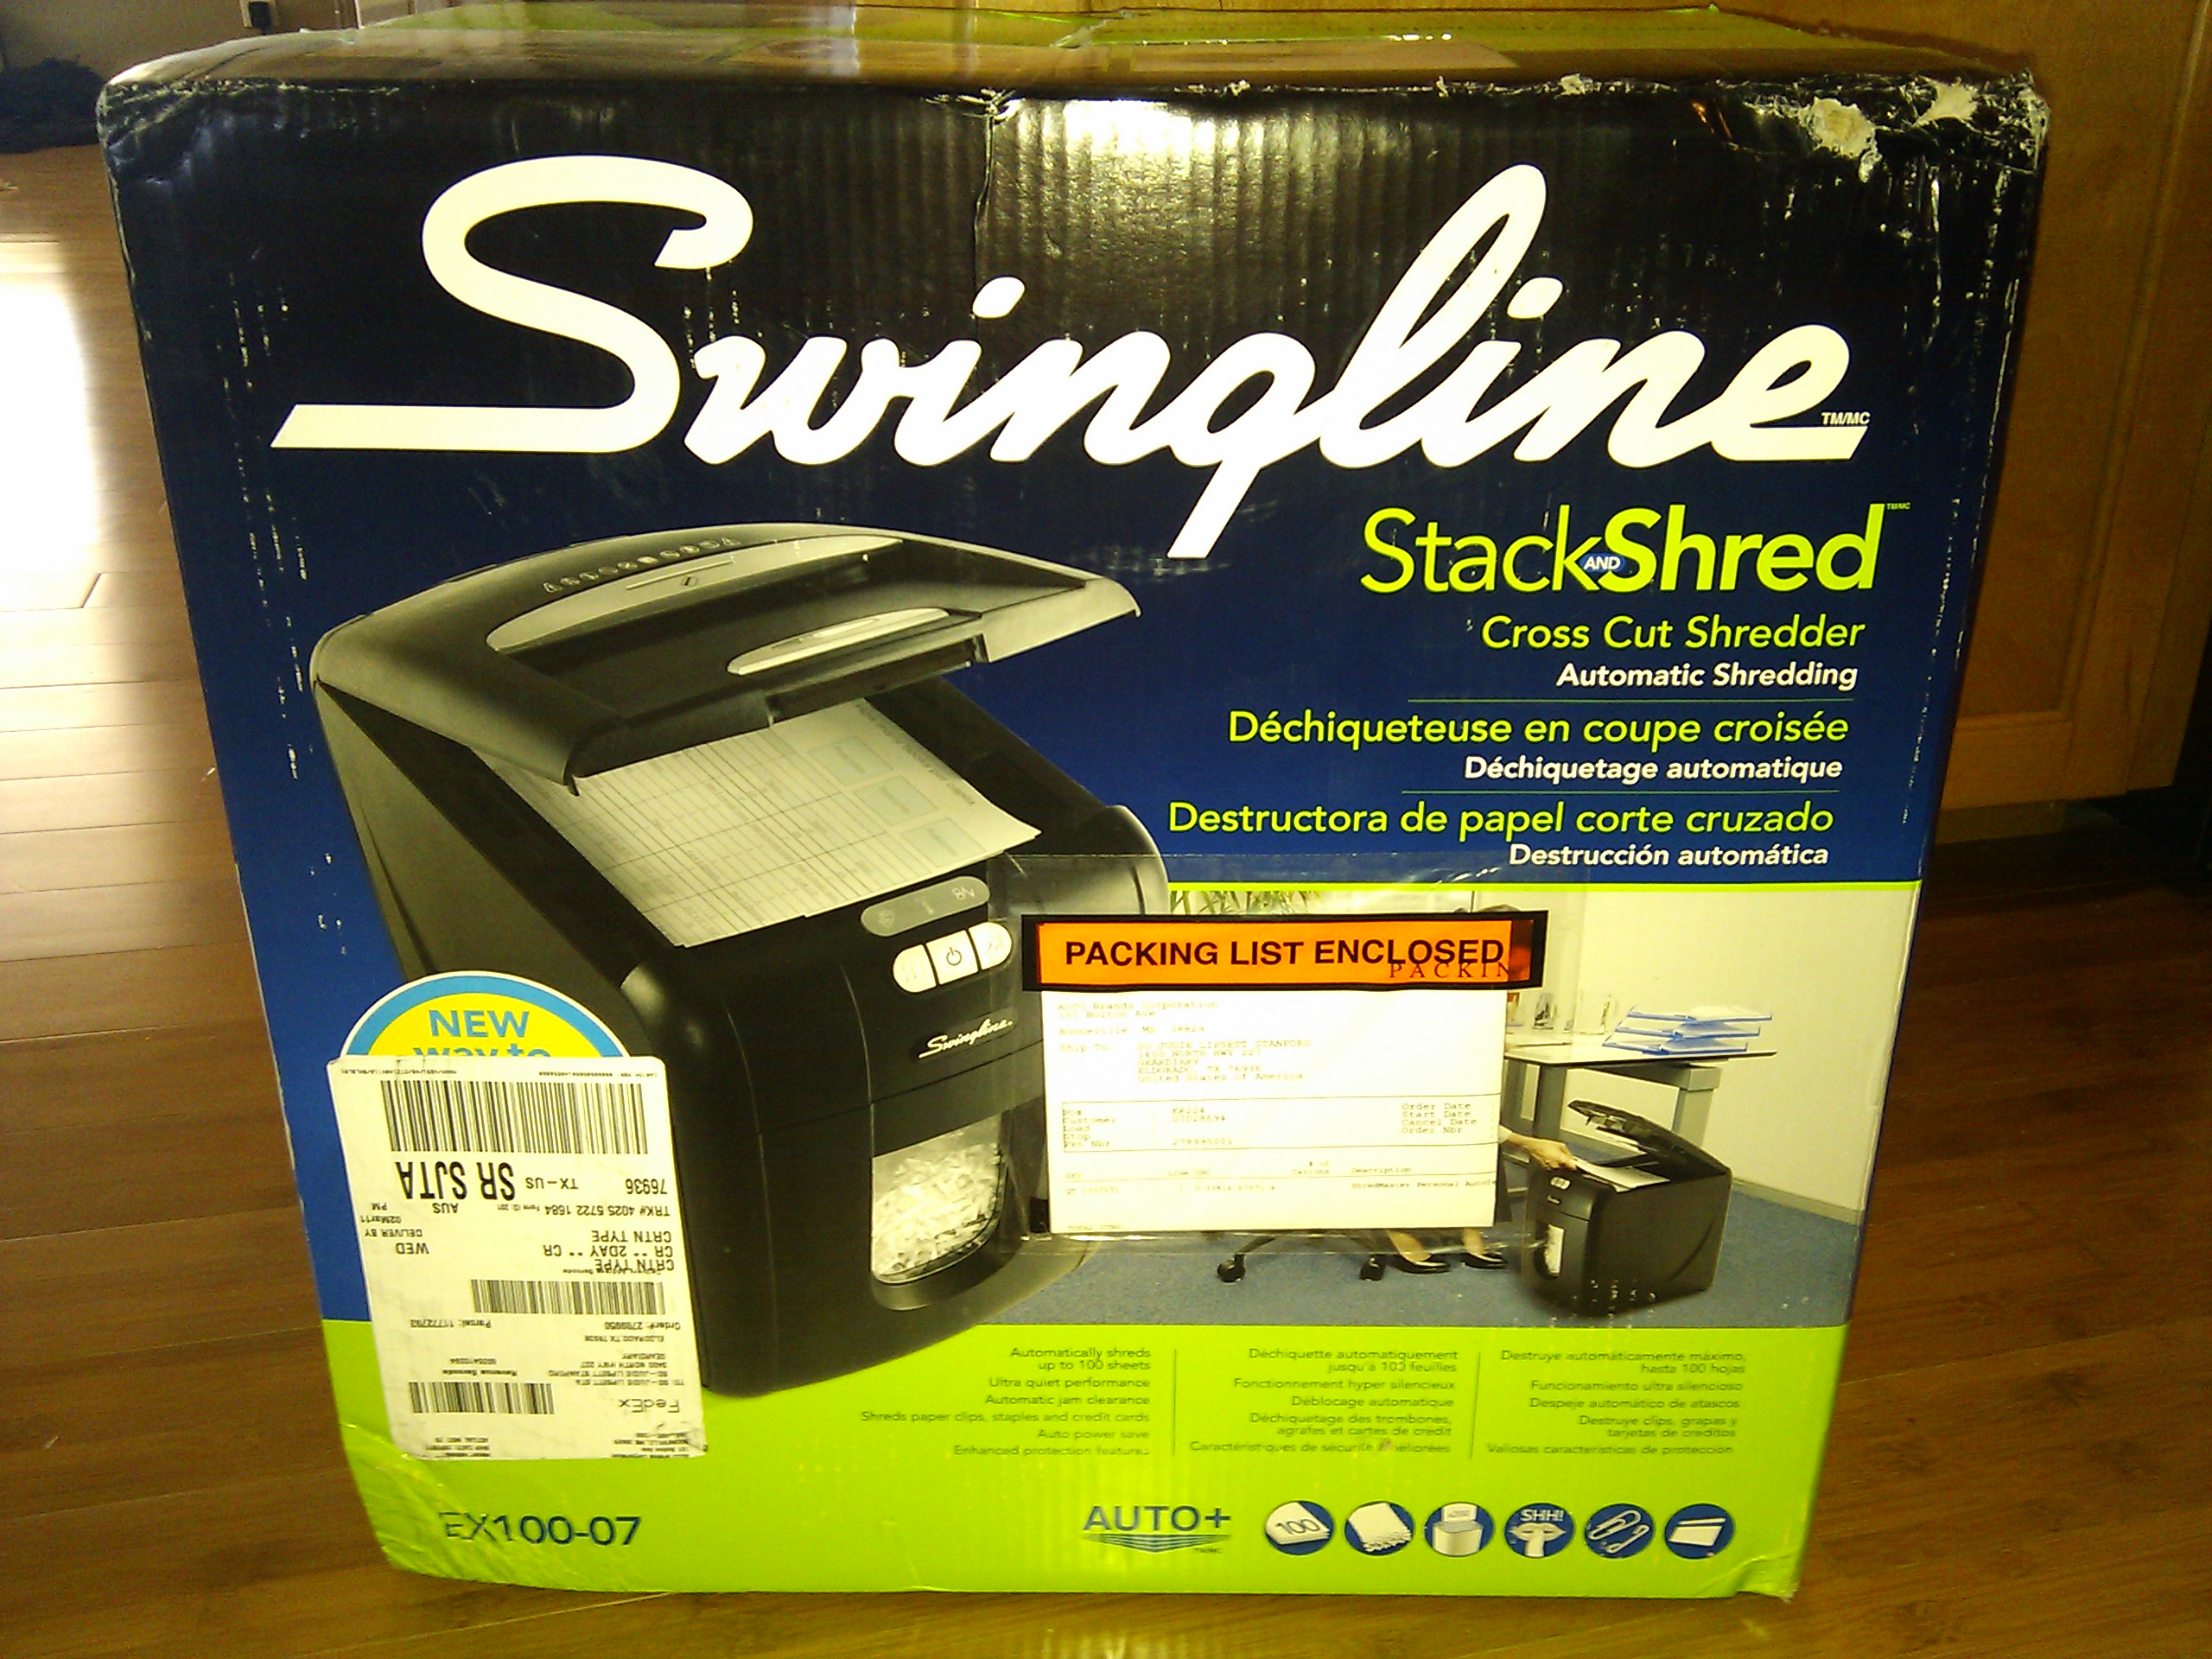 The Swingline Stack-and-Shred Has Arrived!